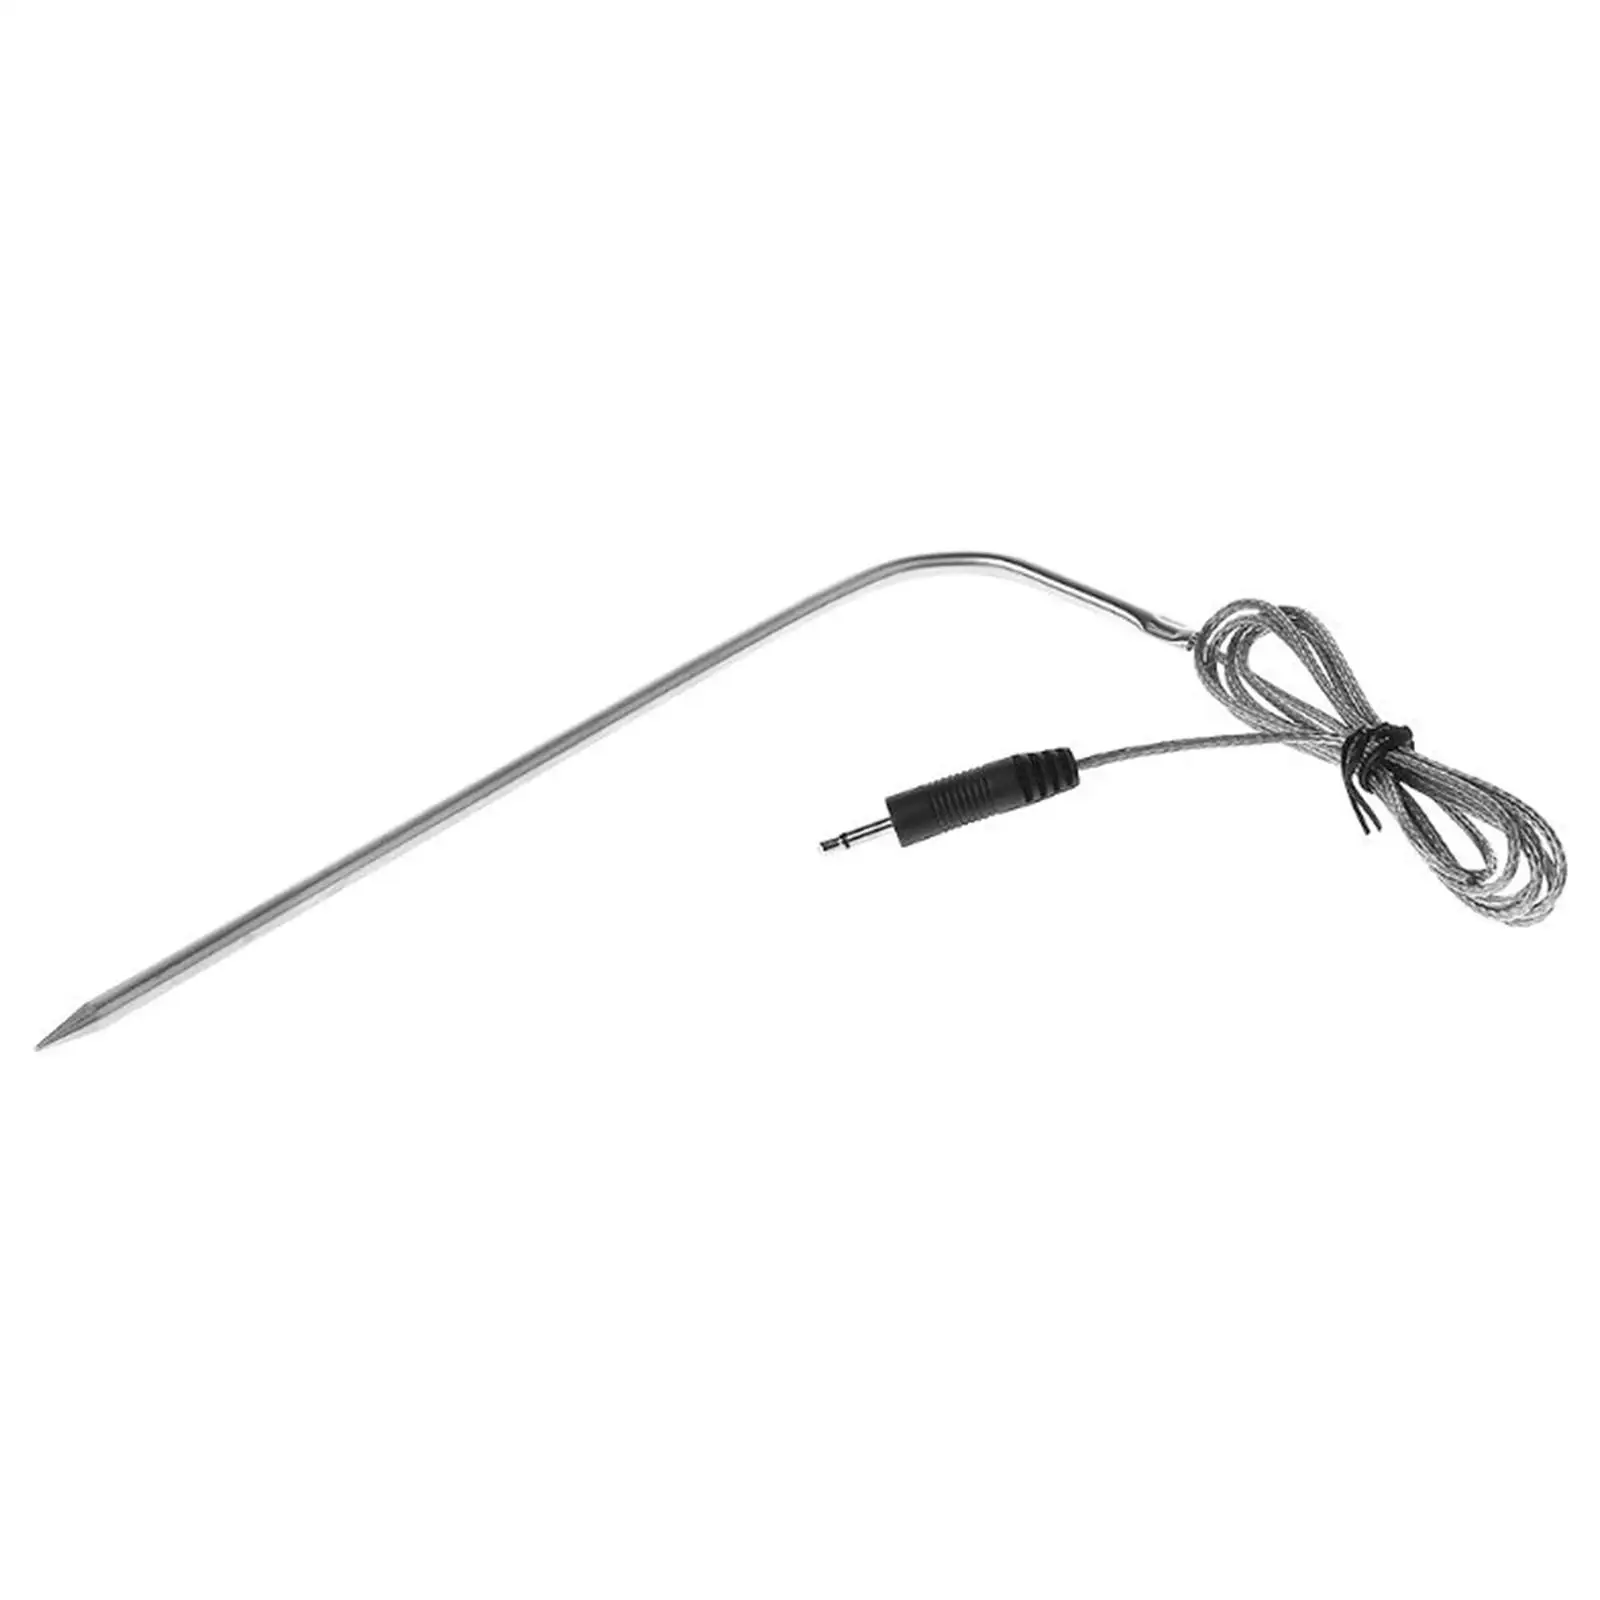 Metal Probe Reliable Durable Baking Supplies for Thermometer Accessory Replace